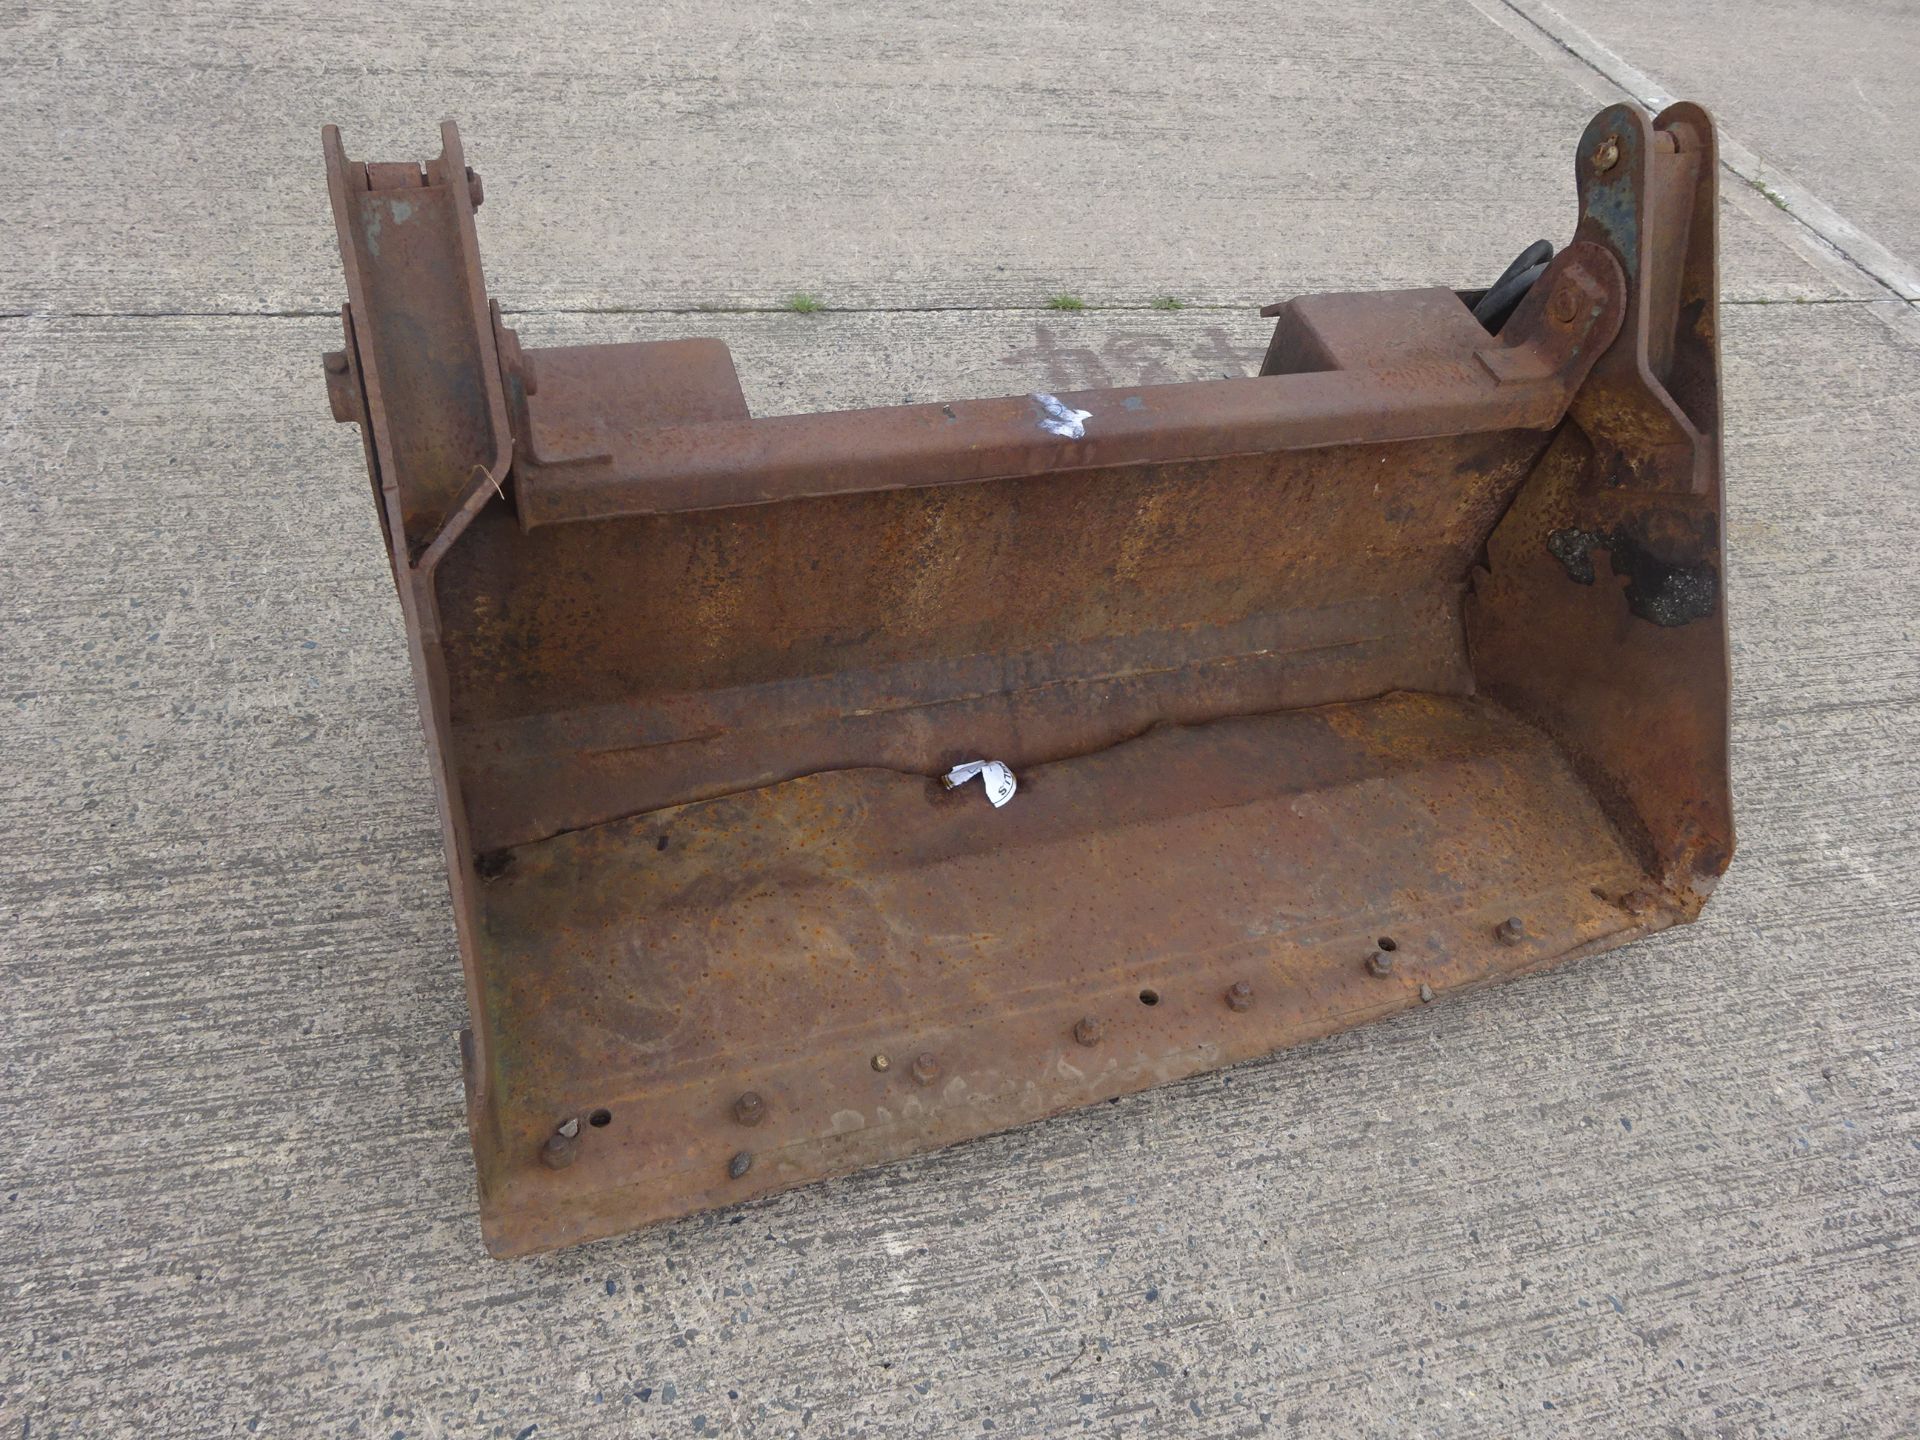 SKID STEER CLAM SHELL BUCKET 4FT WIDE - Image 2 of 2